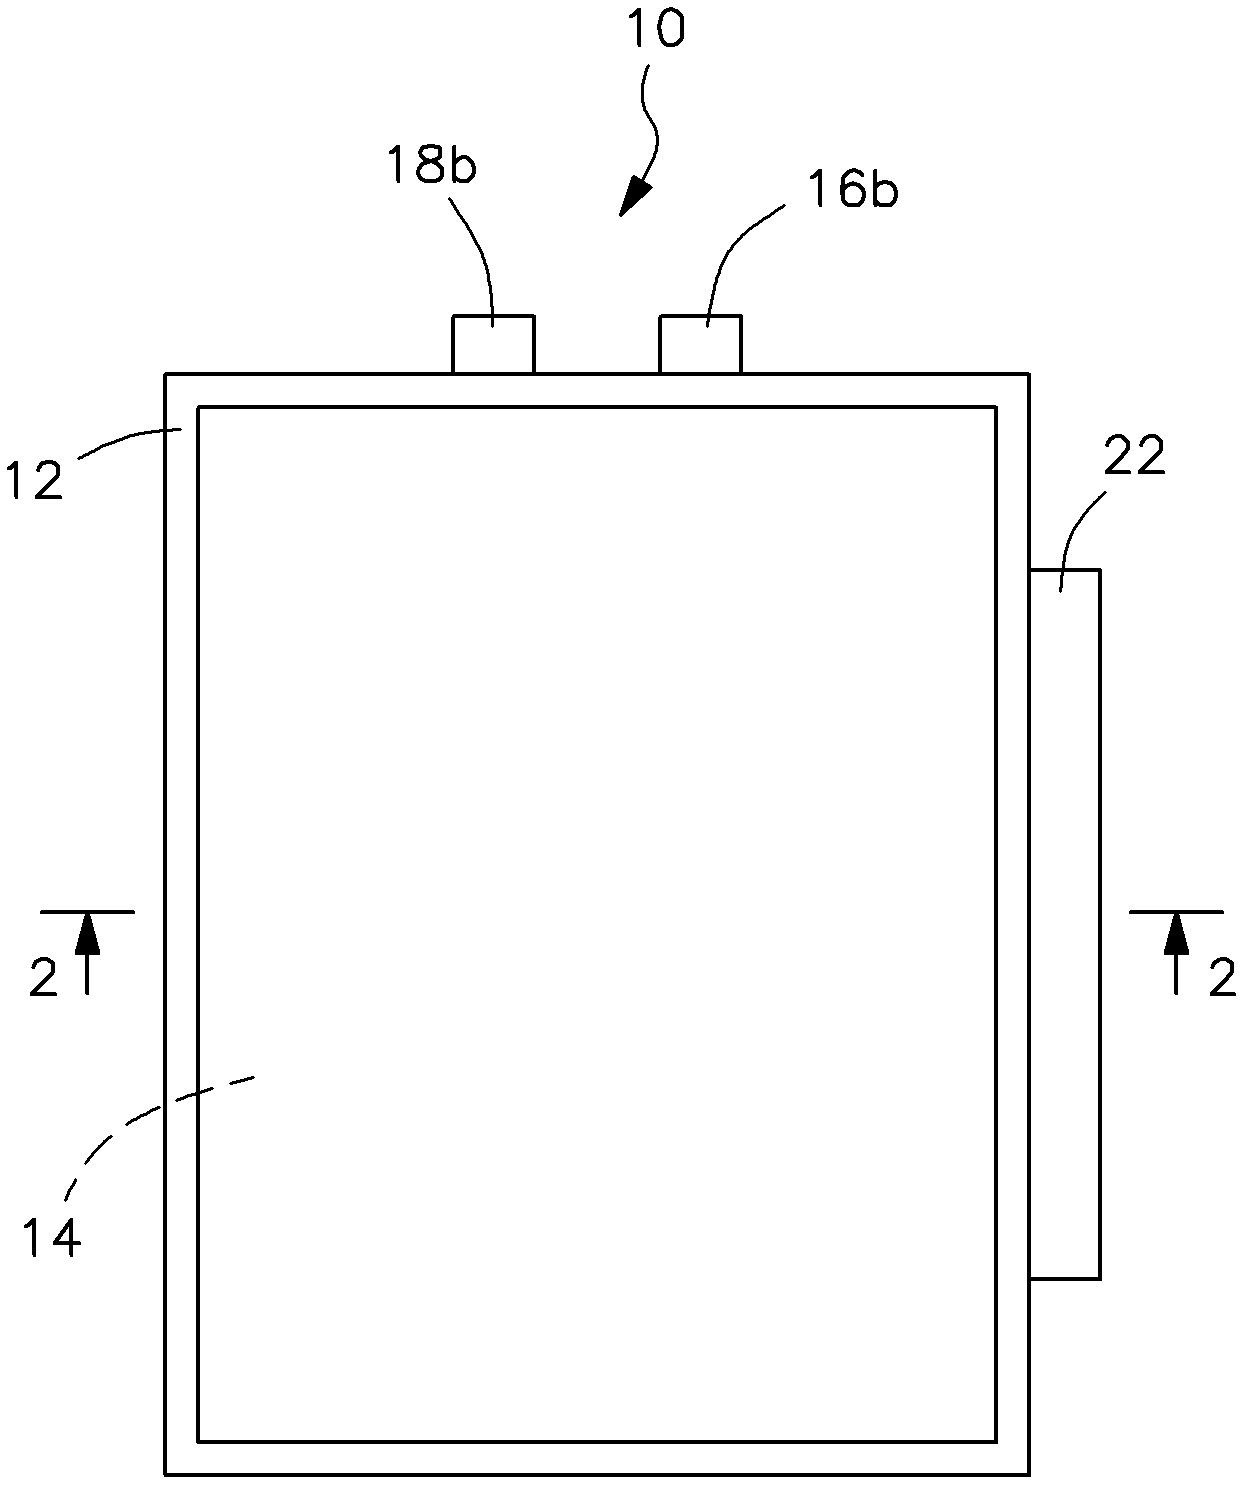 Lithium battery core capable of radiating heat by directly conducting heat from internal to external